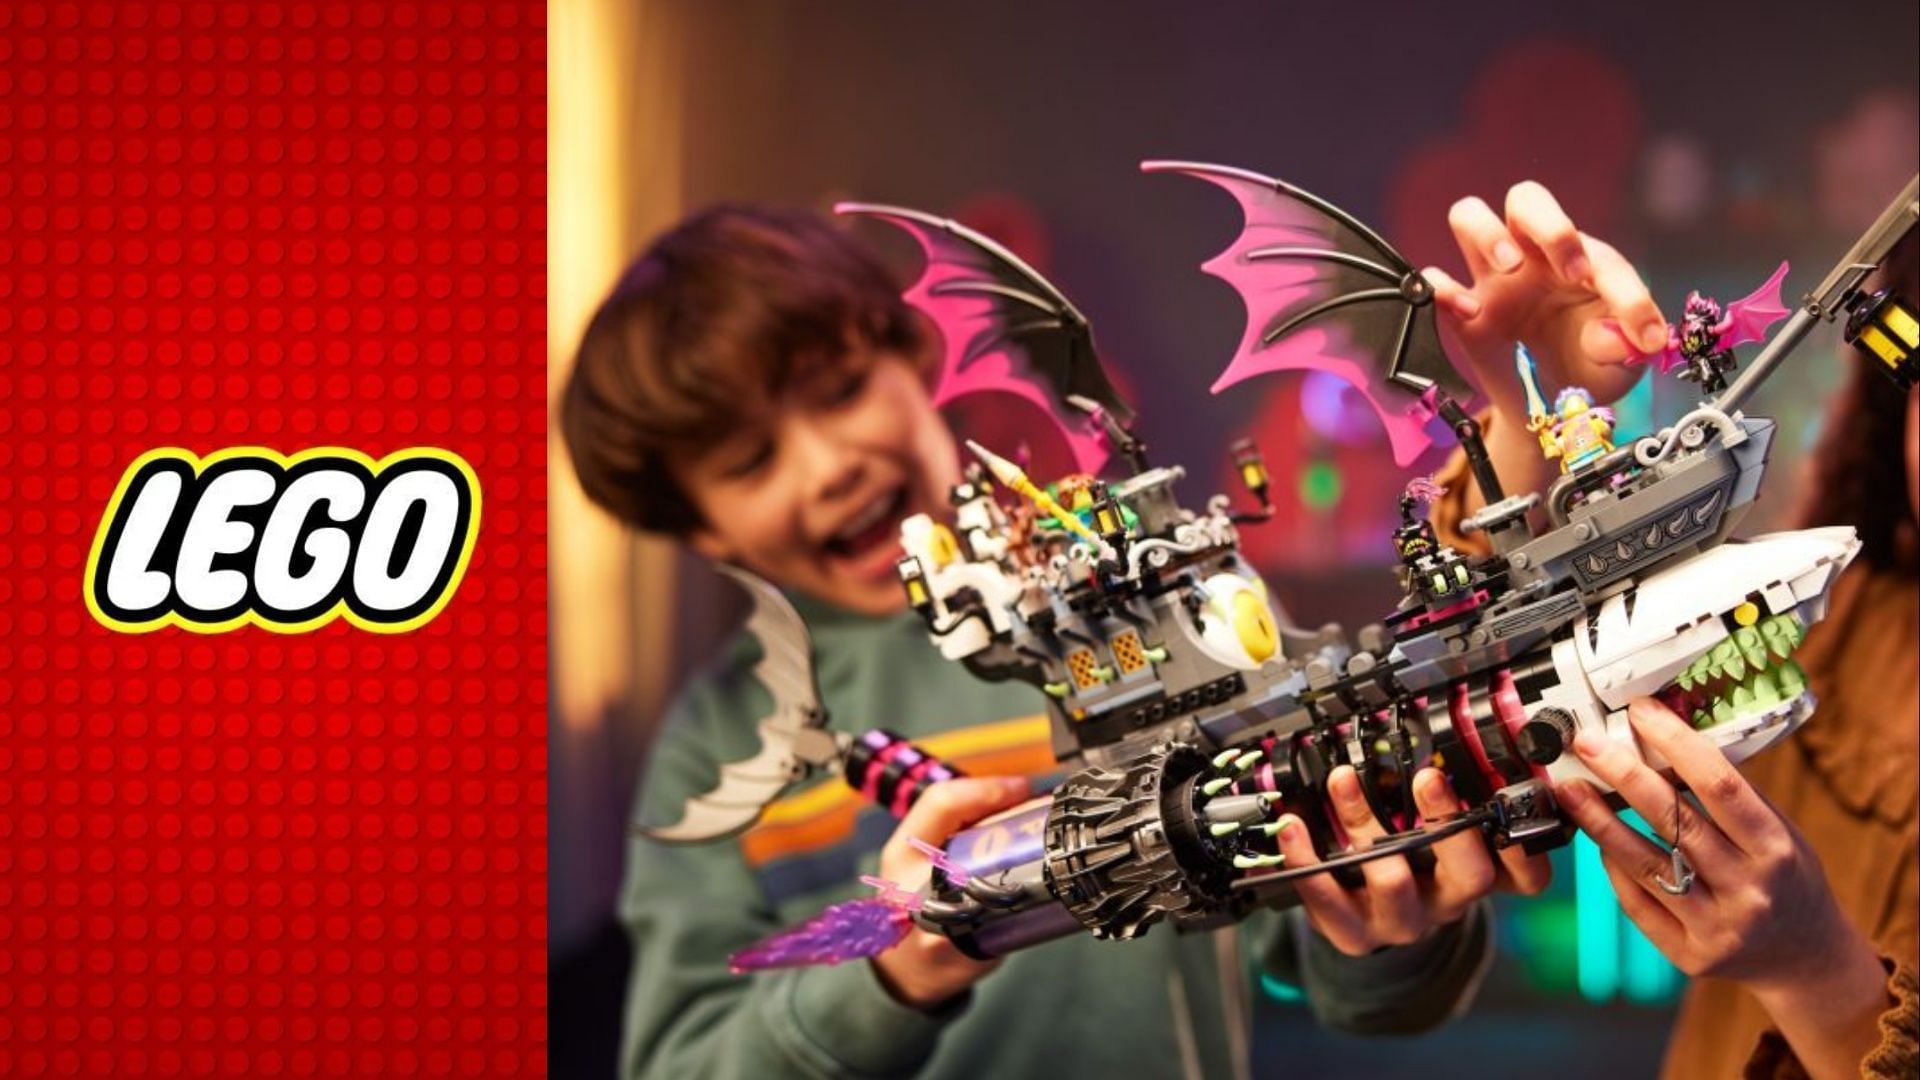 ▻ New LEGO DREAMZzz 2023: sets are available for pre-order on the